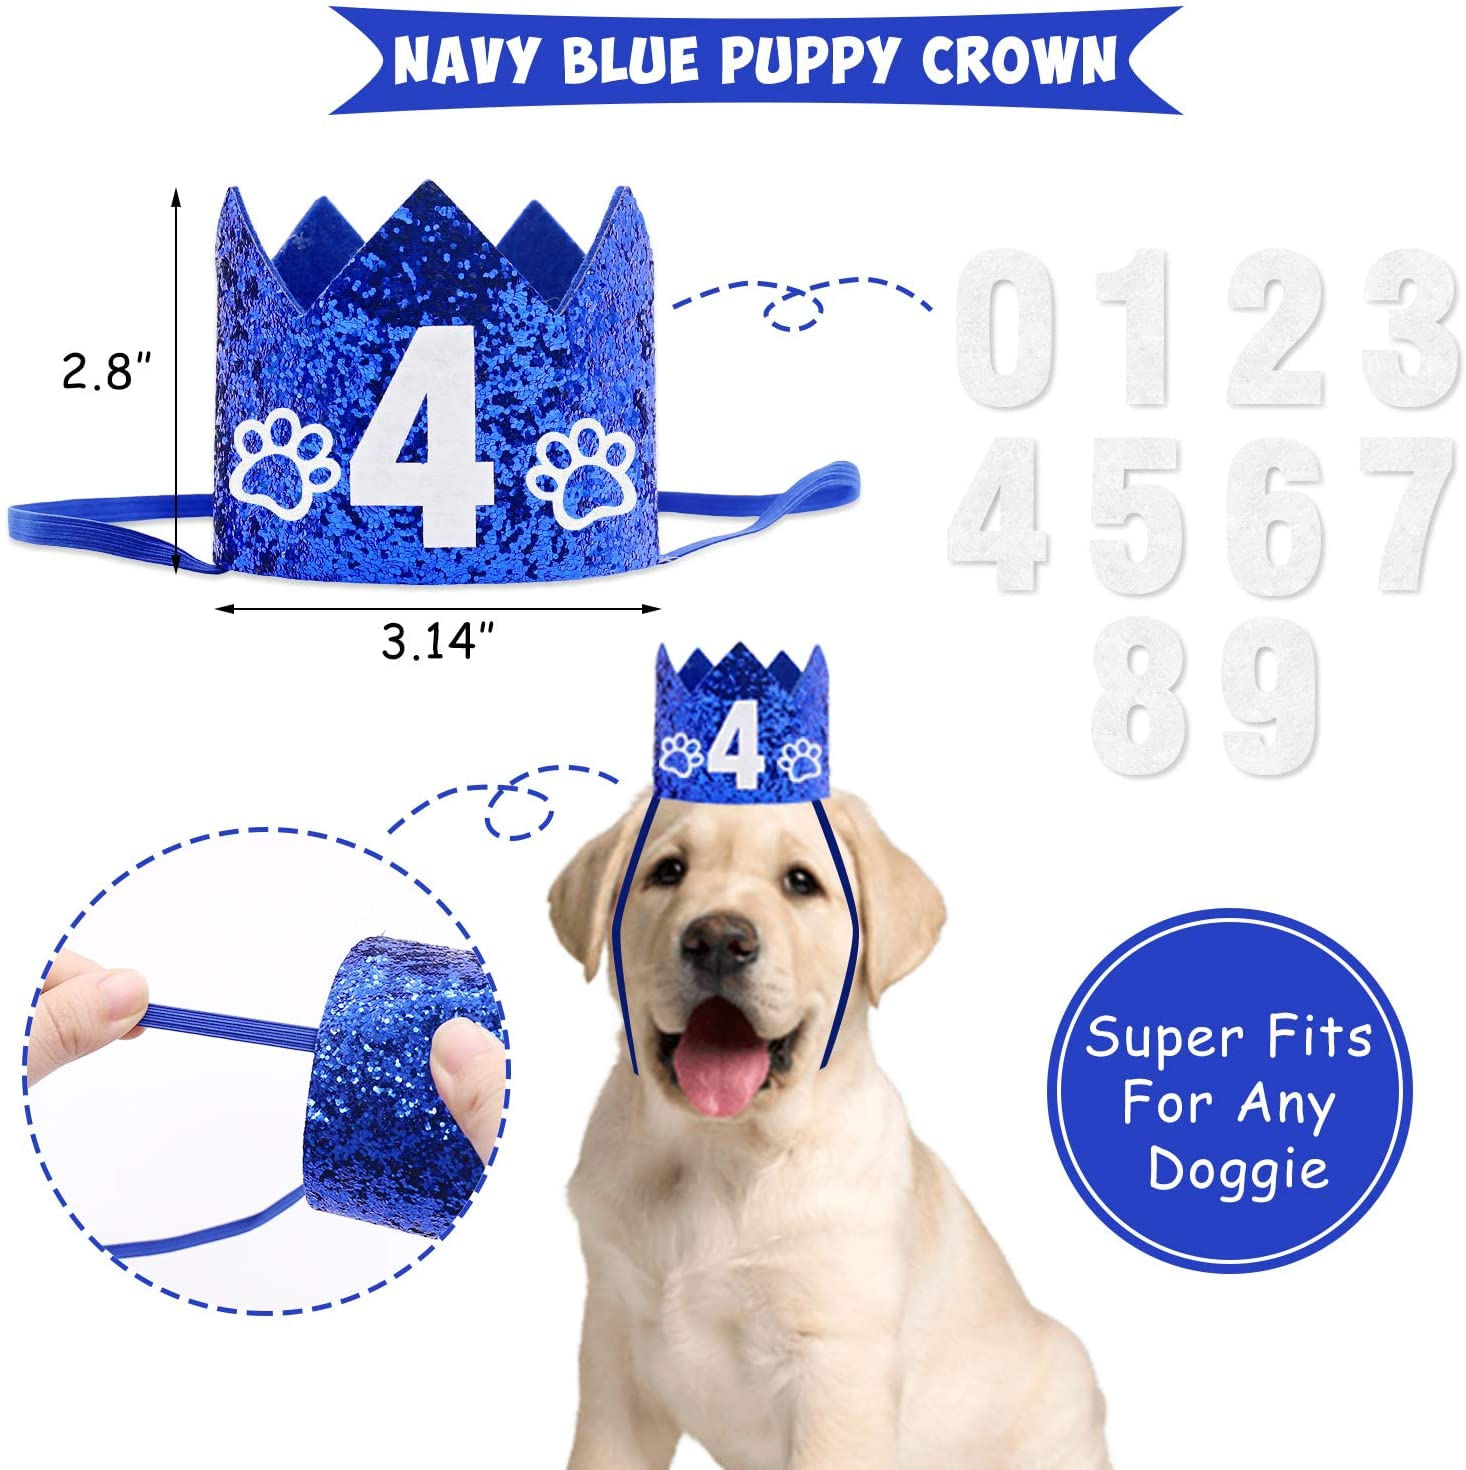 44 Pack Lets Pawty Puppy Boys Birthday Favors│Pet Adoption Party Supplies Kits Silver Glitter Banner Paws Print Balloons Blue Hat Bow Tie Doggie Bone Photo Props Ideas Woof Ruff Decoration 